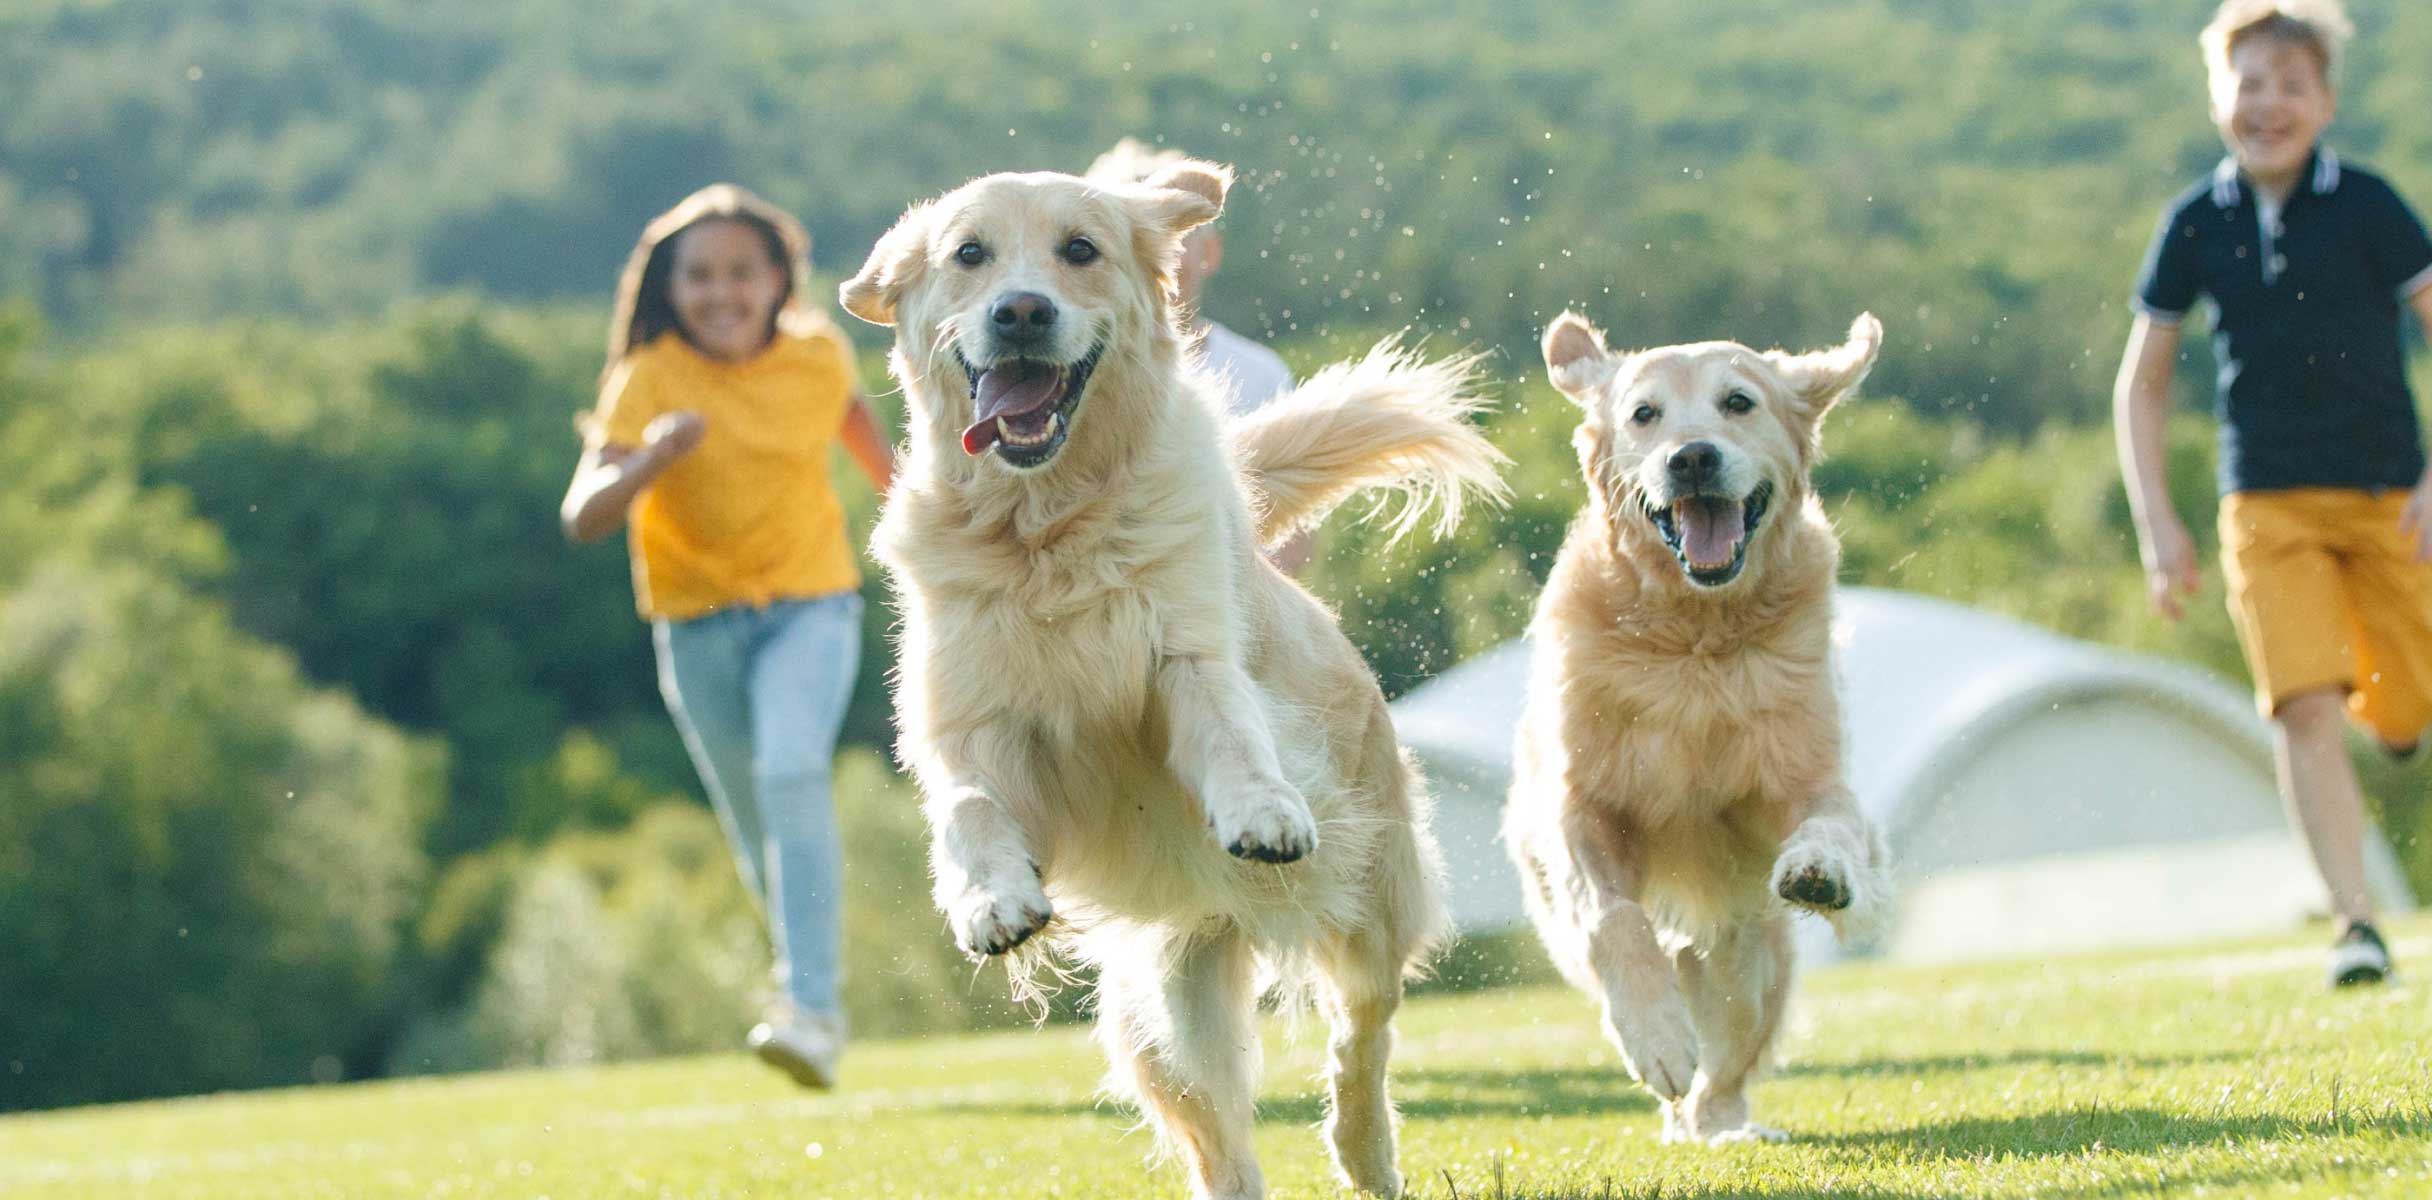 Two Golden Retriever dogs running in a field with kids